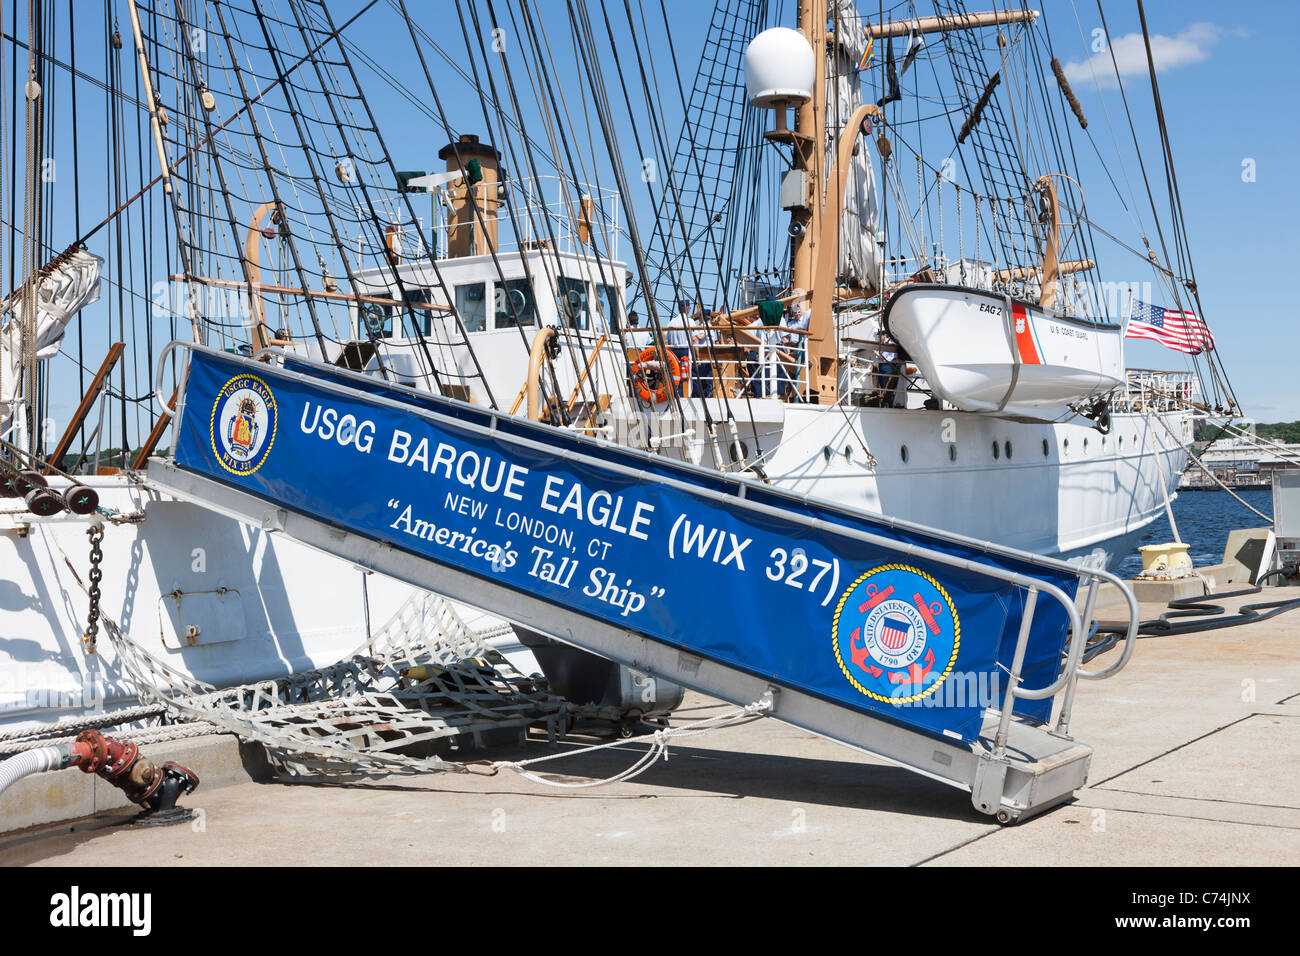 The USCGC 'Eagle', a barque used for training, docked at its homeport at the Coast Guard Academy in New London, Connecticut. Stock Photo